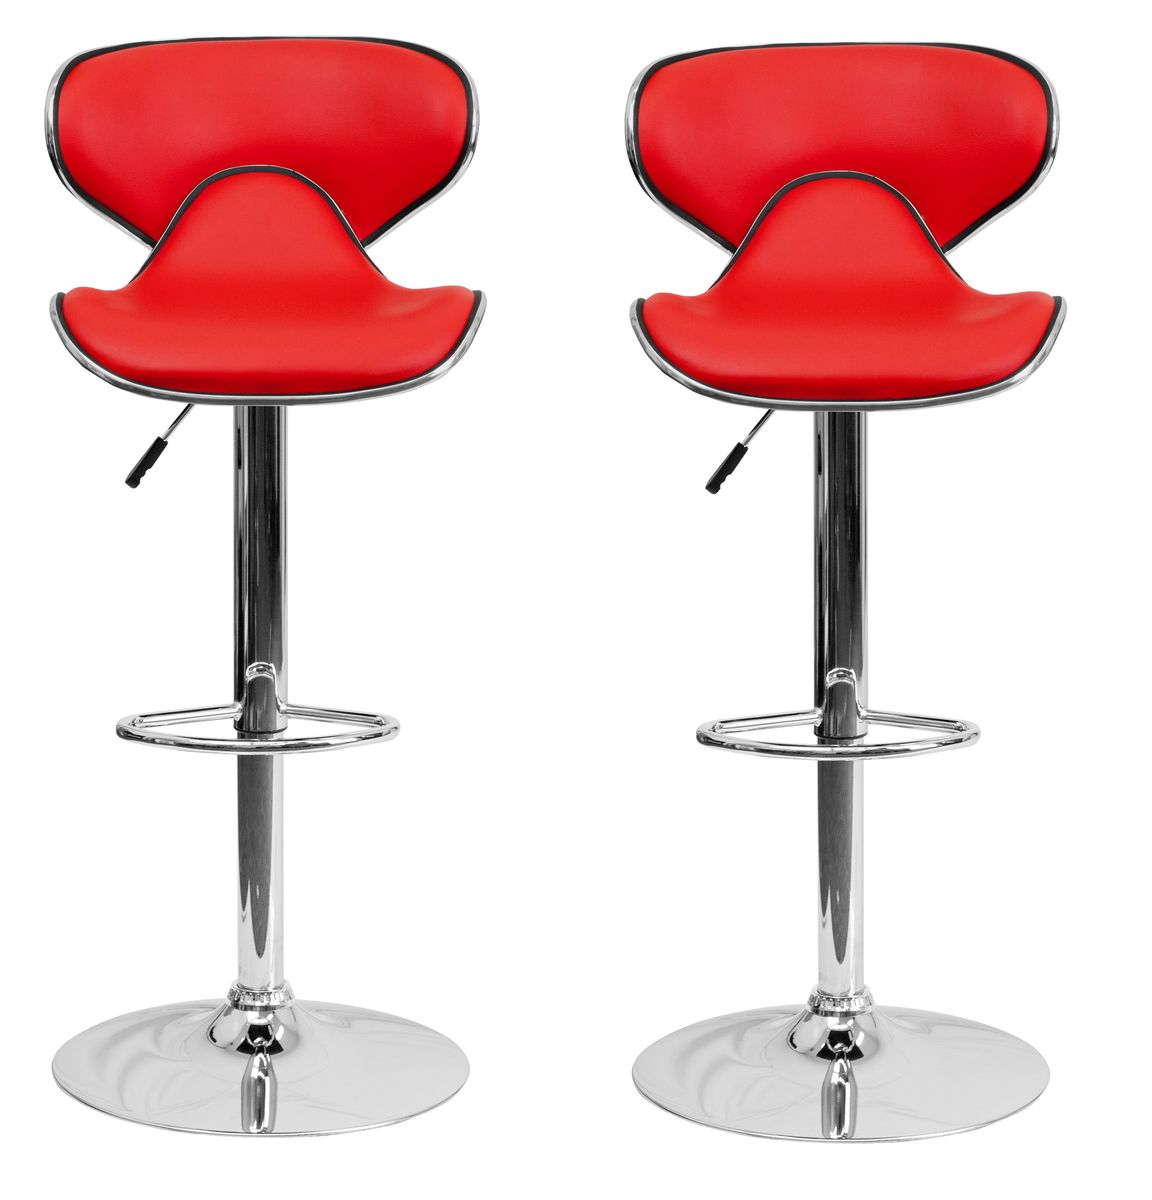 Pu Leather Bar Chair Stools Set Of 2, Red Leather Bar Stools Kitchen